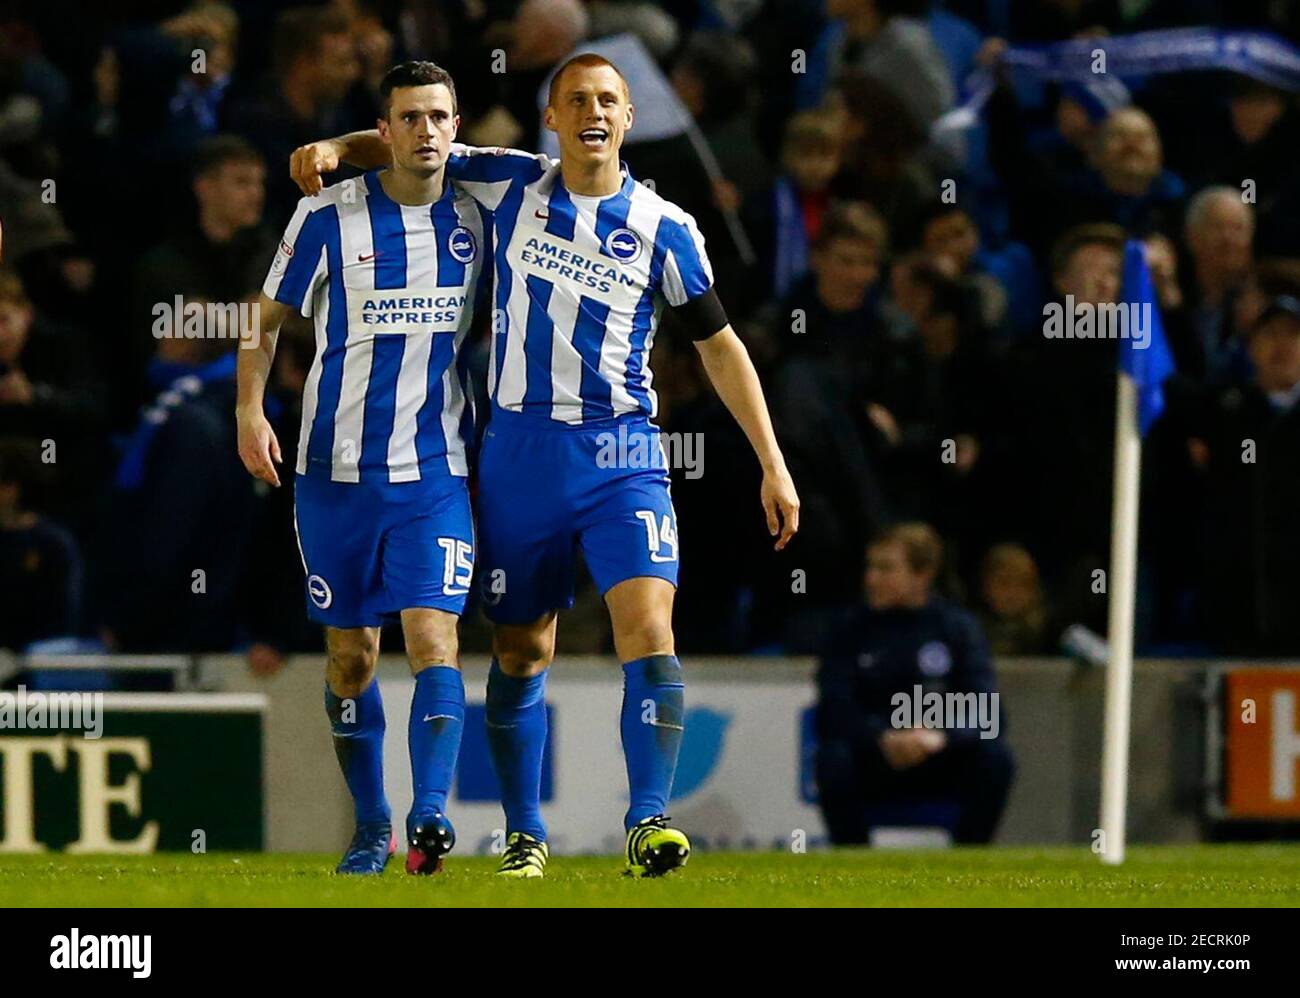 Britain Football Soccer - Brighton & Hove Albion v Reading - Sky Bet Championship - The American Express Community Stadium - 25/2/17 Jamie Murphy celebrates scoring the second goal for Brighton with Steve Sidwell (R) Mandatory Credit: Action Images / Peter Cziborra Livepic EDITORIAL USE ONLY. No use with unauthorized audio, video, data, fixture lists, club/league logos or 'live' services. Online in-match use limited to 45 images, no video emulation. No use in betting, games or single club/league/player publications. Please contact your account representative for further details. Stock Photo